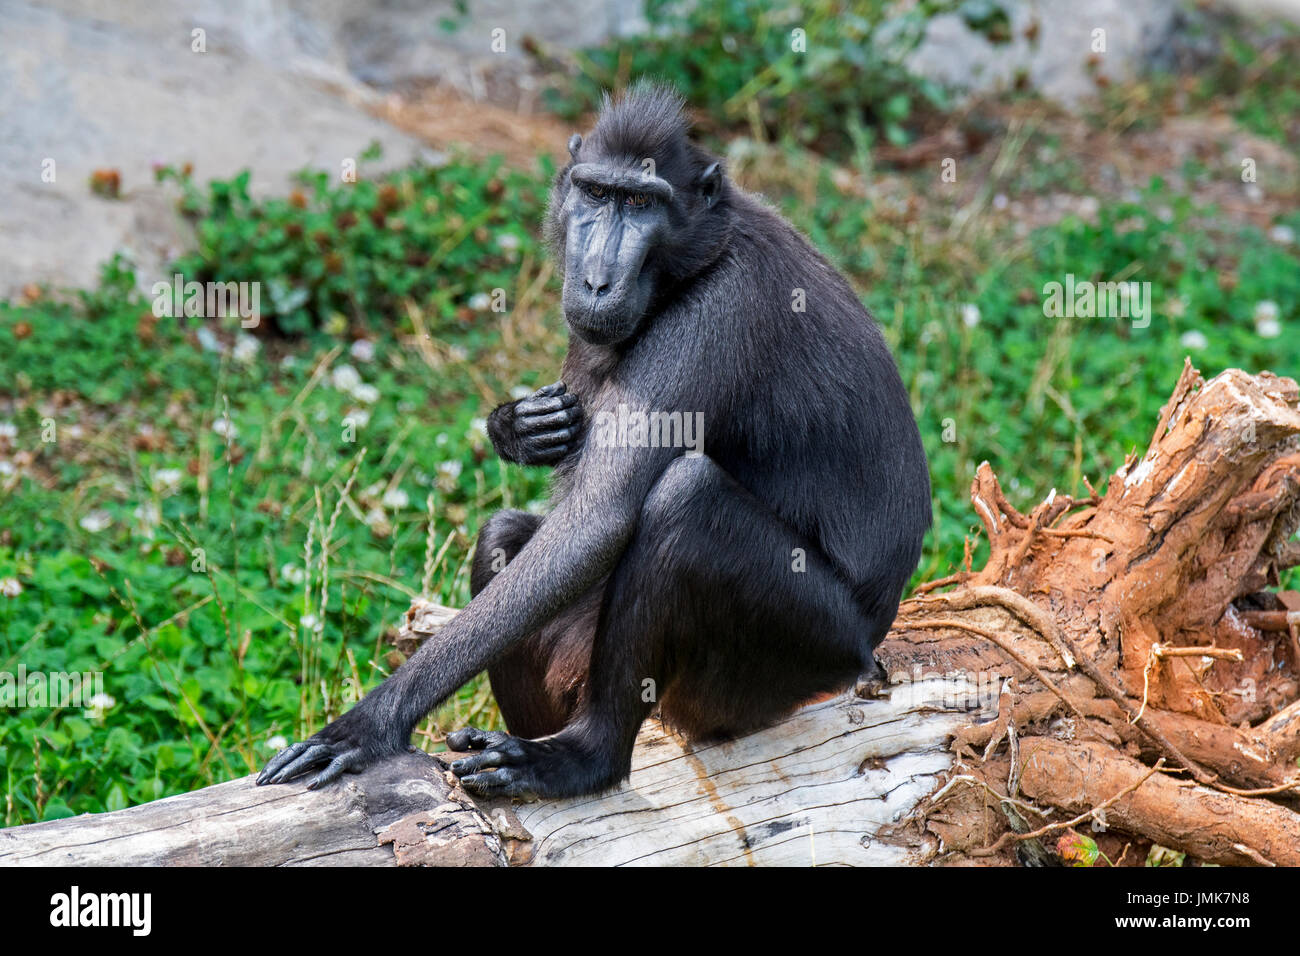 Celebes crested macaque / crested black macaque / Sulawesi crested macaque / black ape (Macaca nigra) native to the Indonesian island of Sulawesi Stock Photo